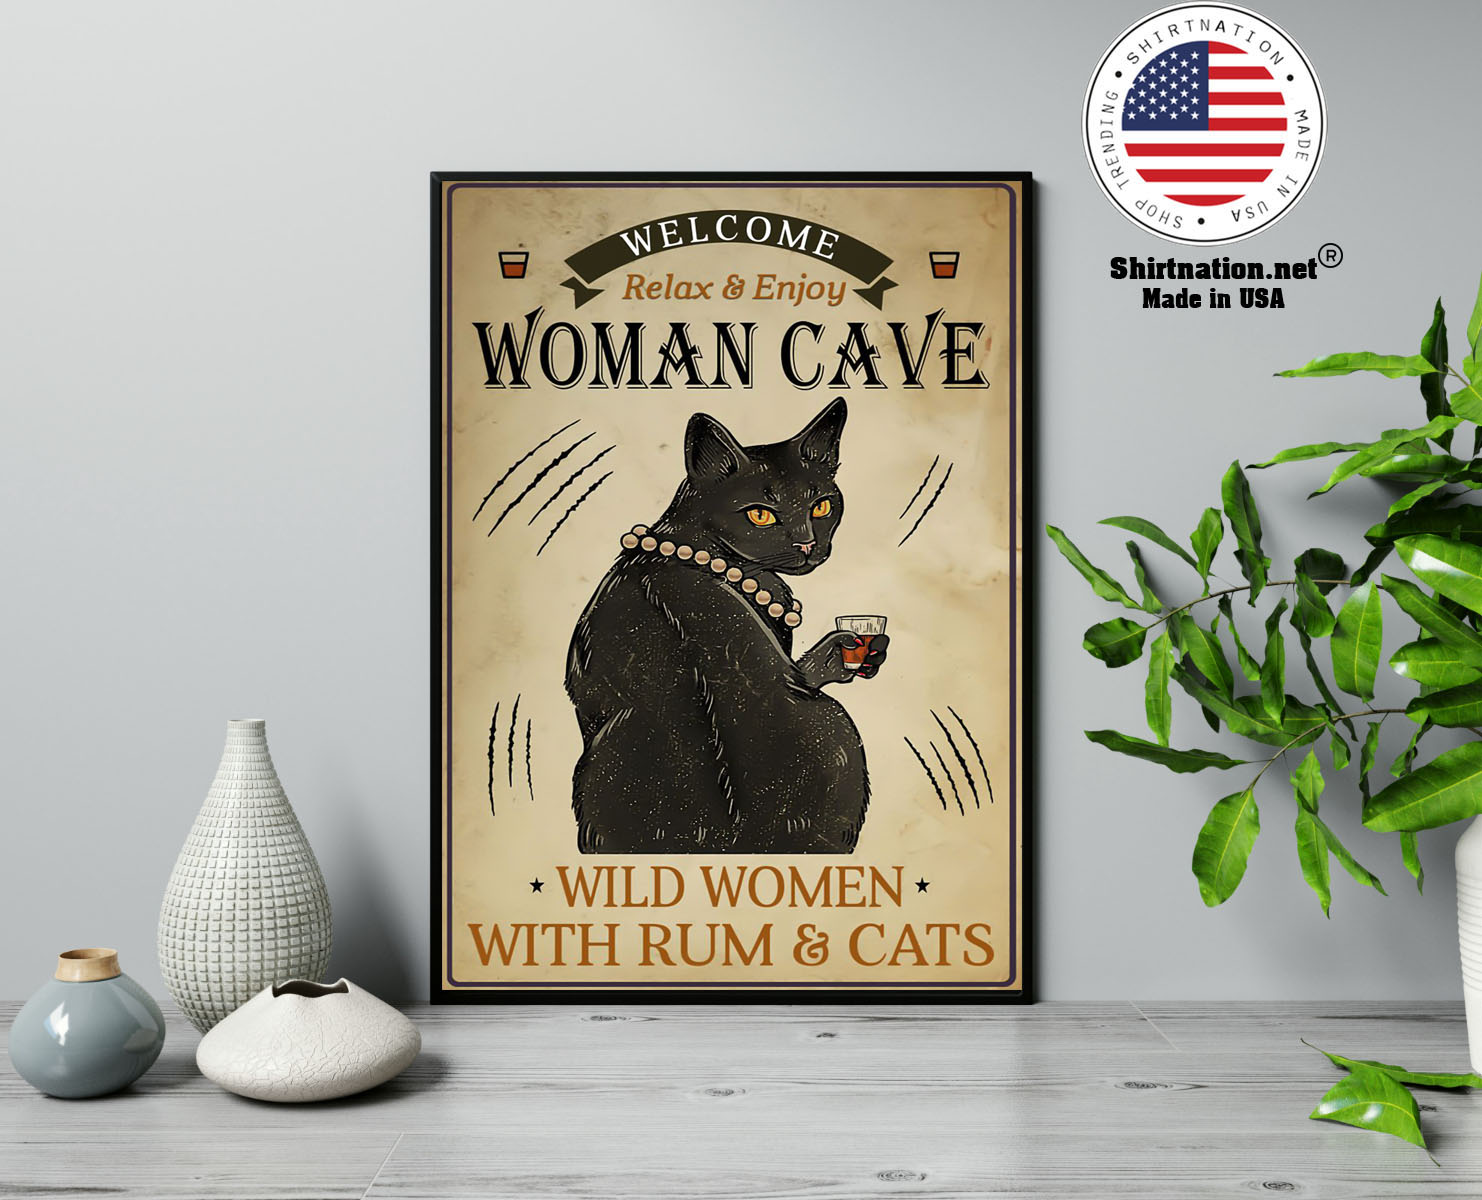 Welcome relax enjoy woman cave will women with rum and cats poster 13